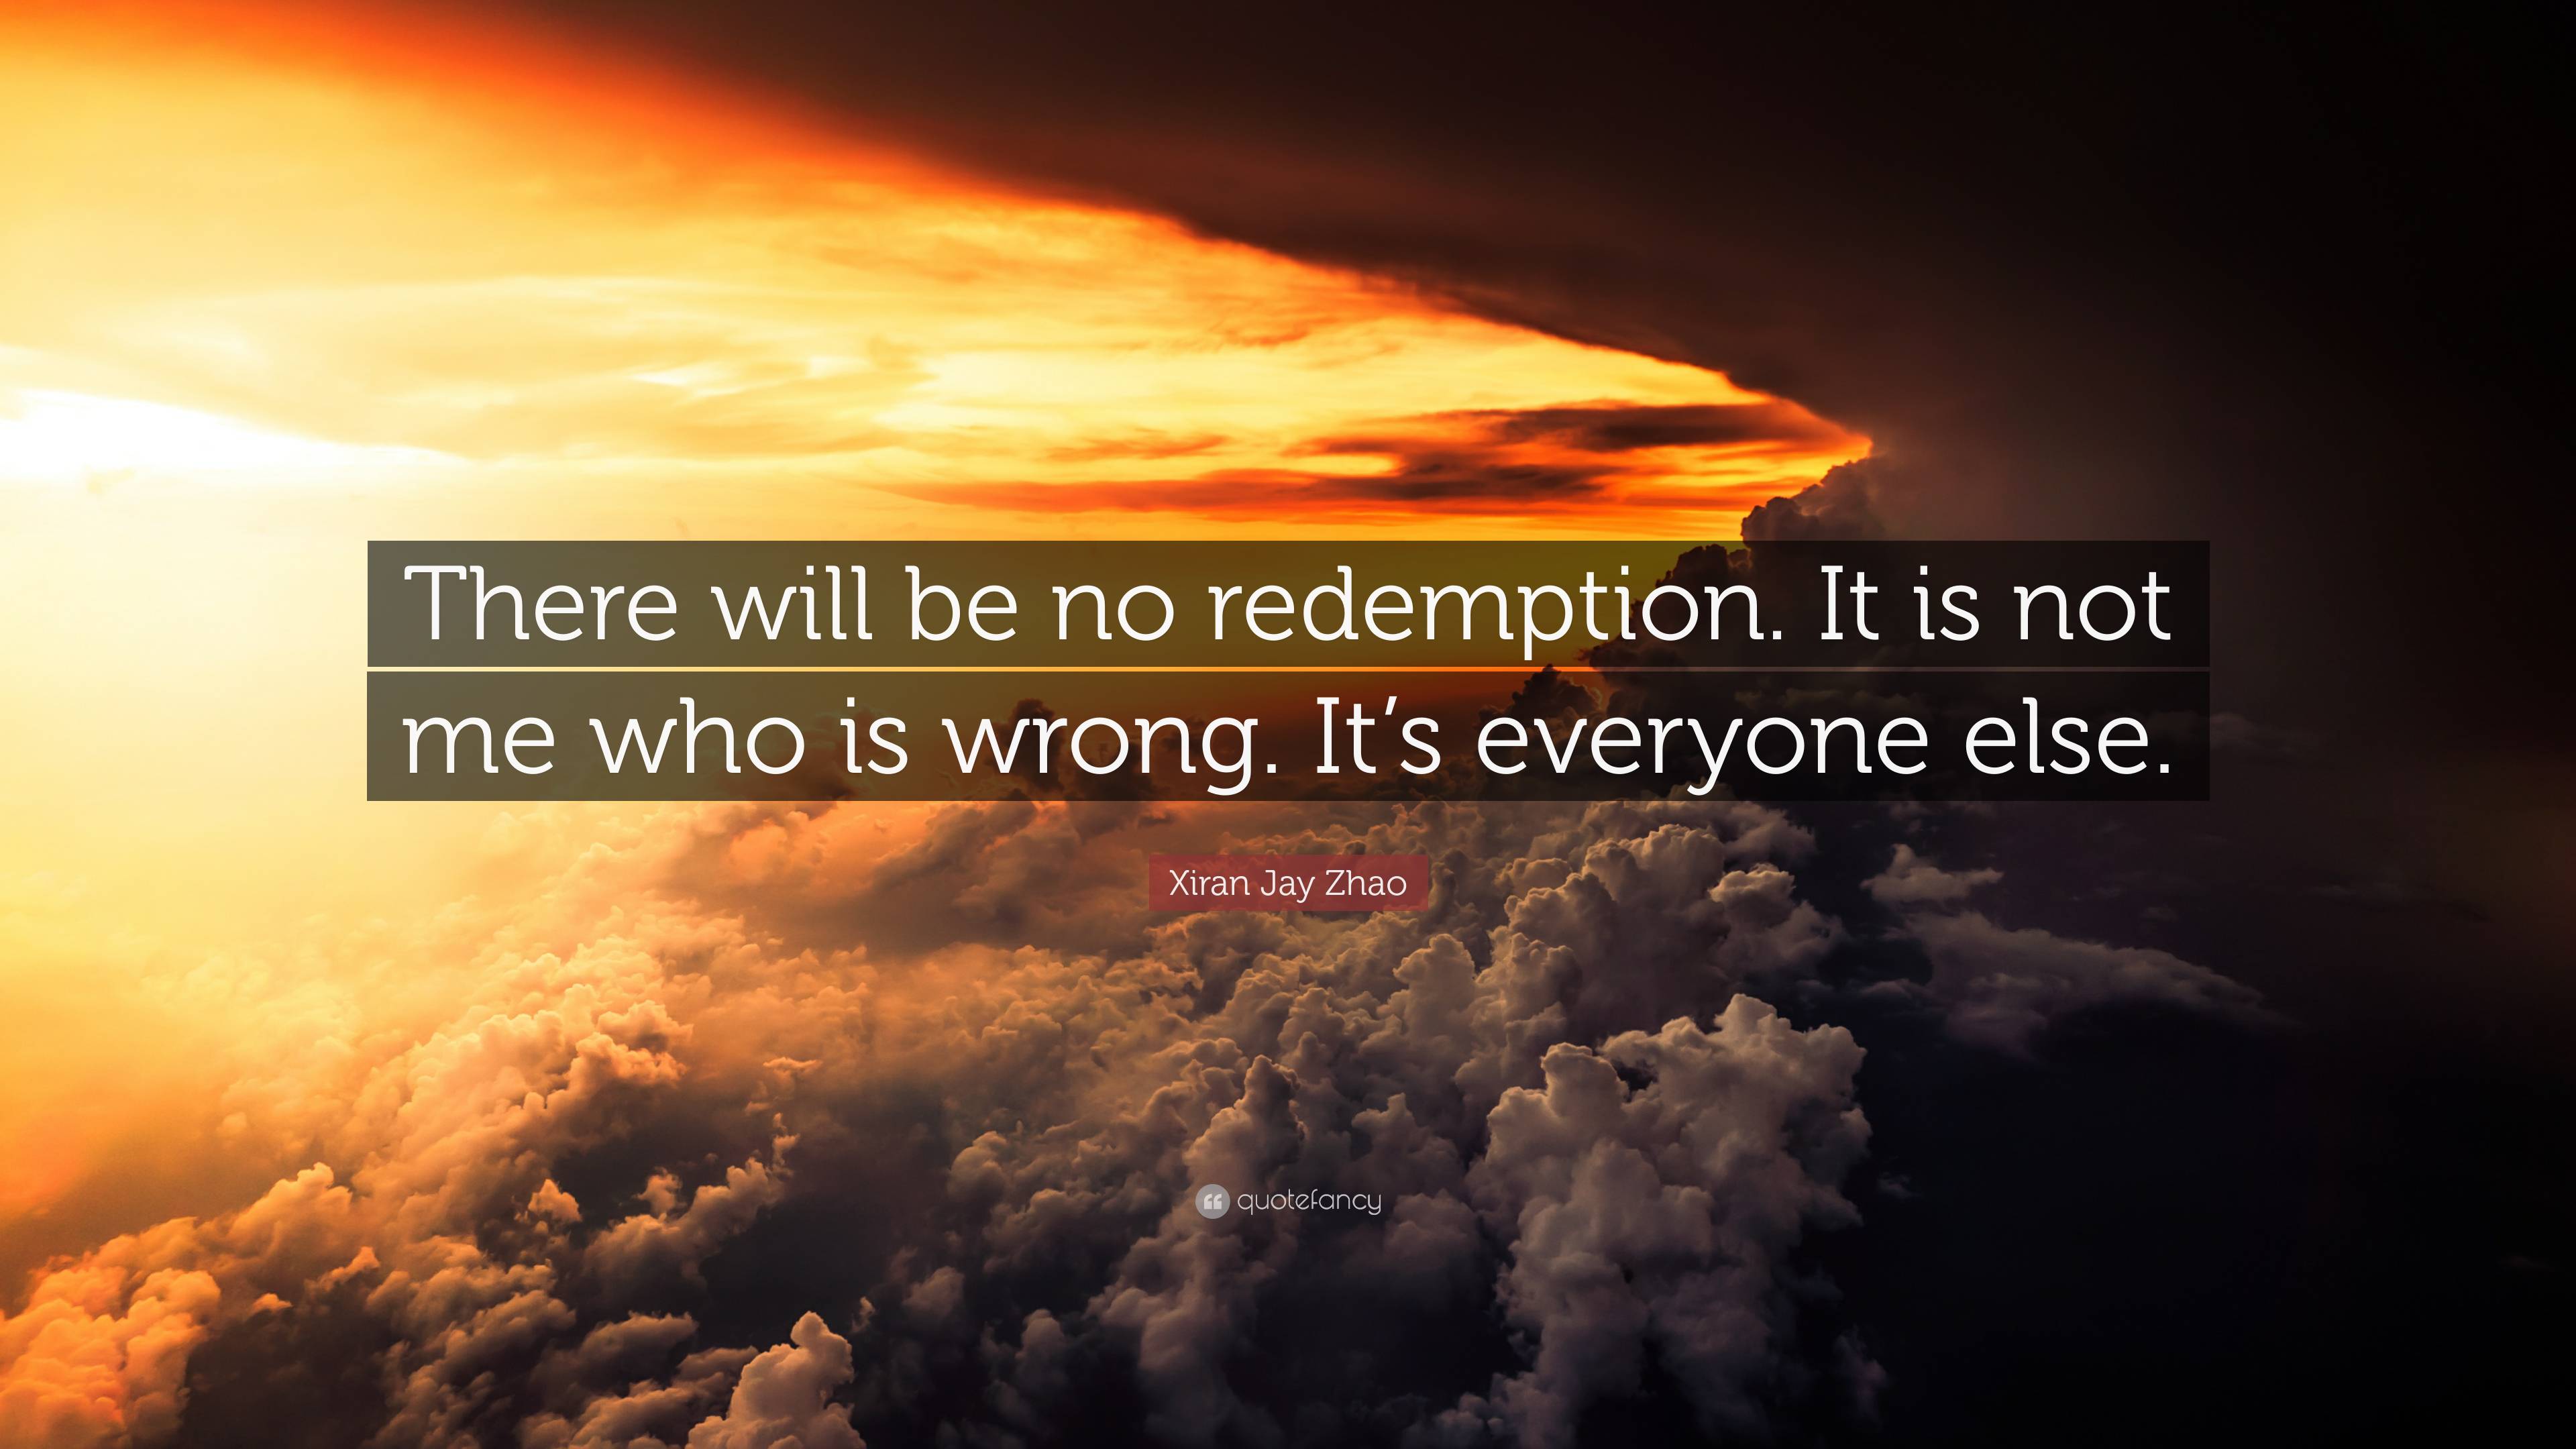 Xiran Jay Zhao Quote “there Will Be No Redemption It Is Not Me Who Is Wrong It S Everyone Else ”